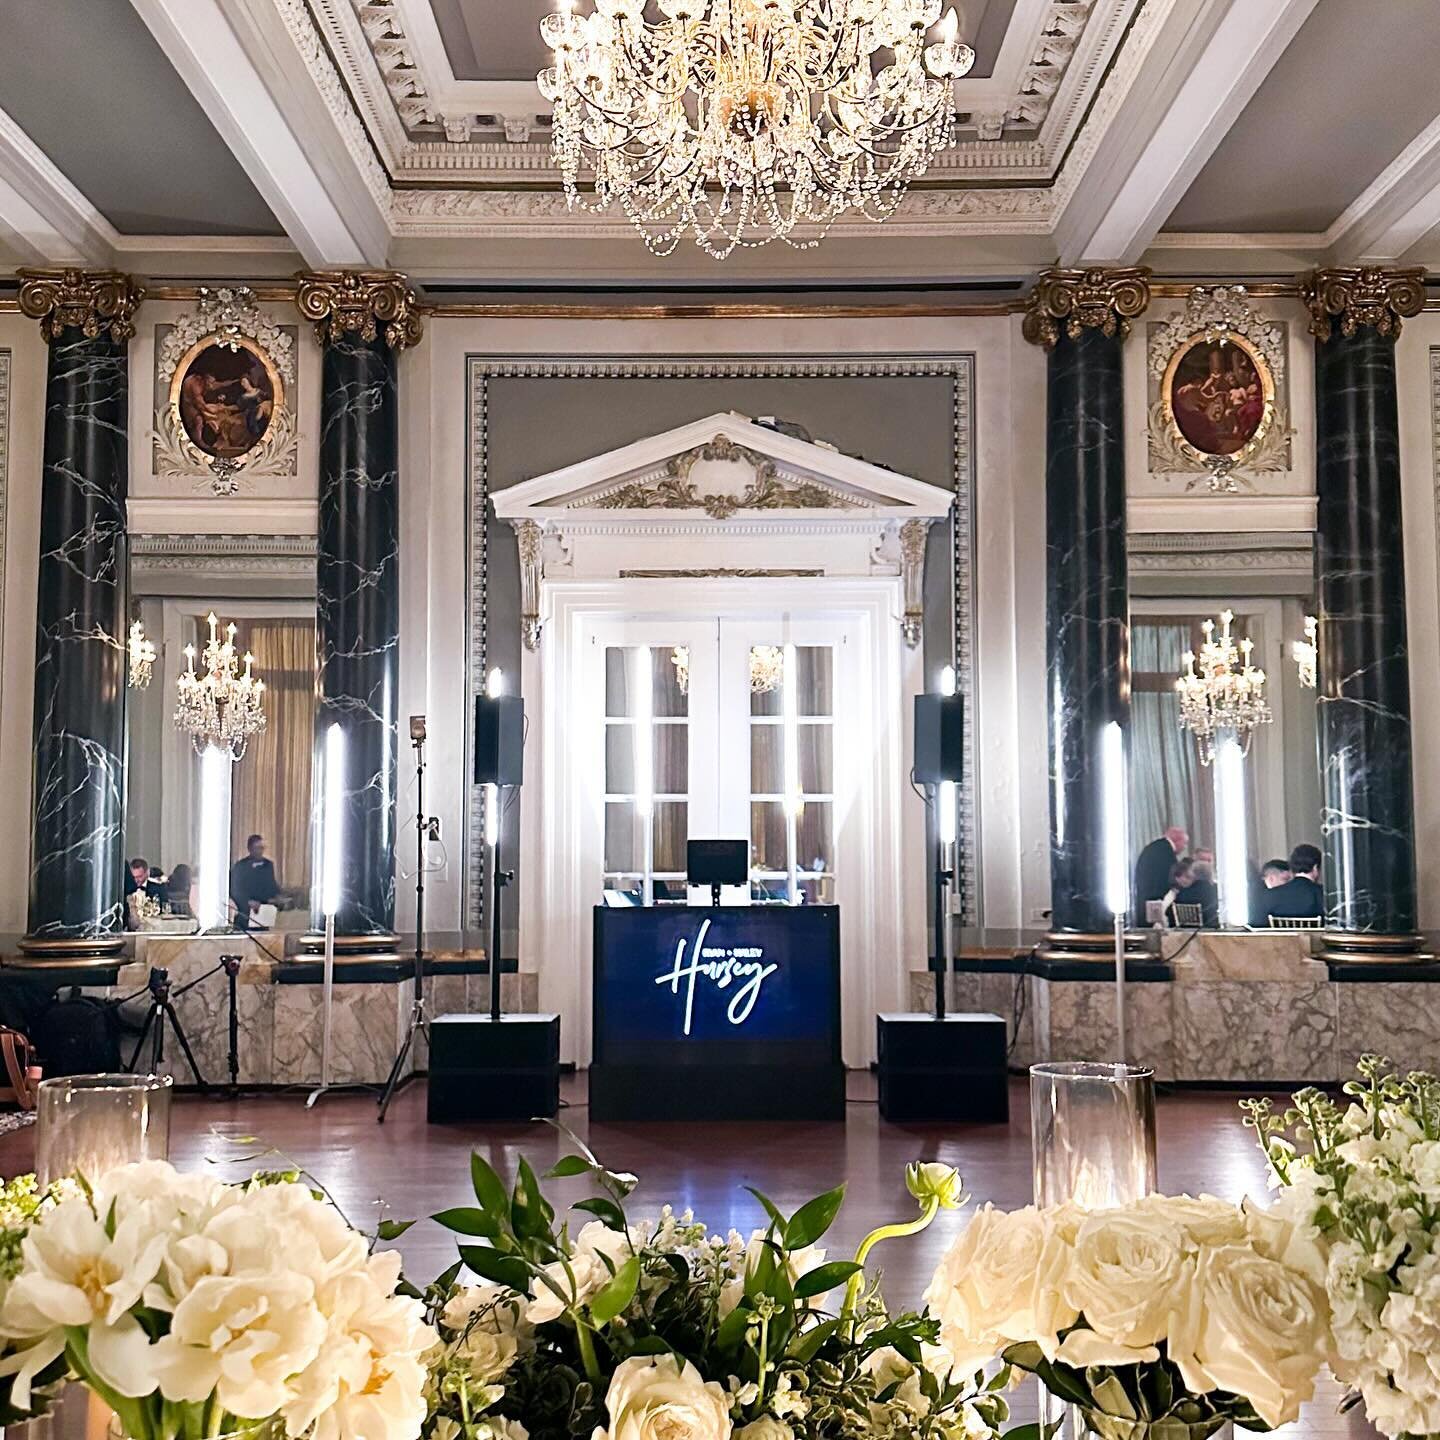 Touch of class. 🤌🏽

Powered by: RCF // @rcfusa x @rcf_audio 
Photographer: Addy Rae Photo // @addyraephoto
Planner: Social Graces Events // @socialgracesevents
Venue: The Belvedere // @belvedereandcoevents
Florist: Blush Floral Design Studio // @bl